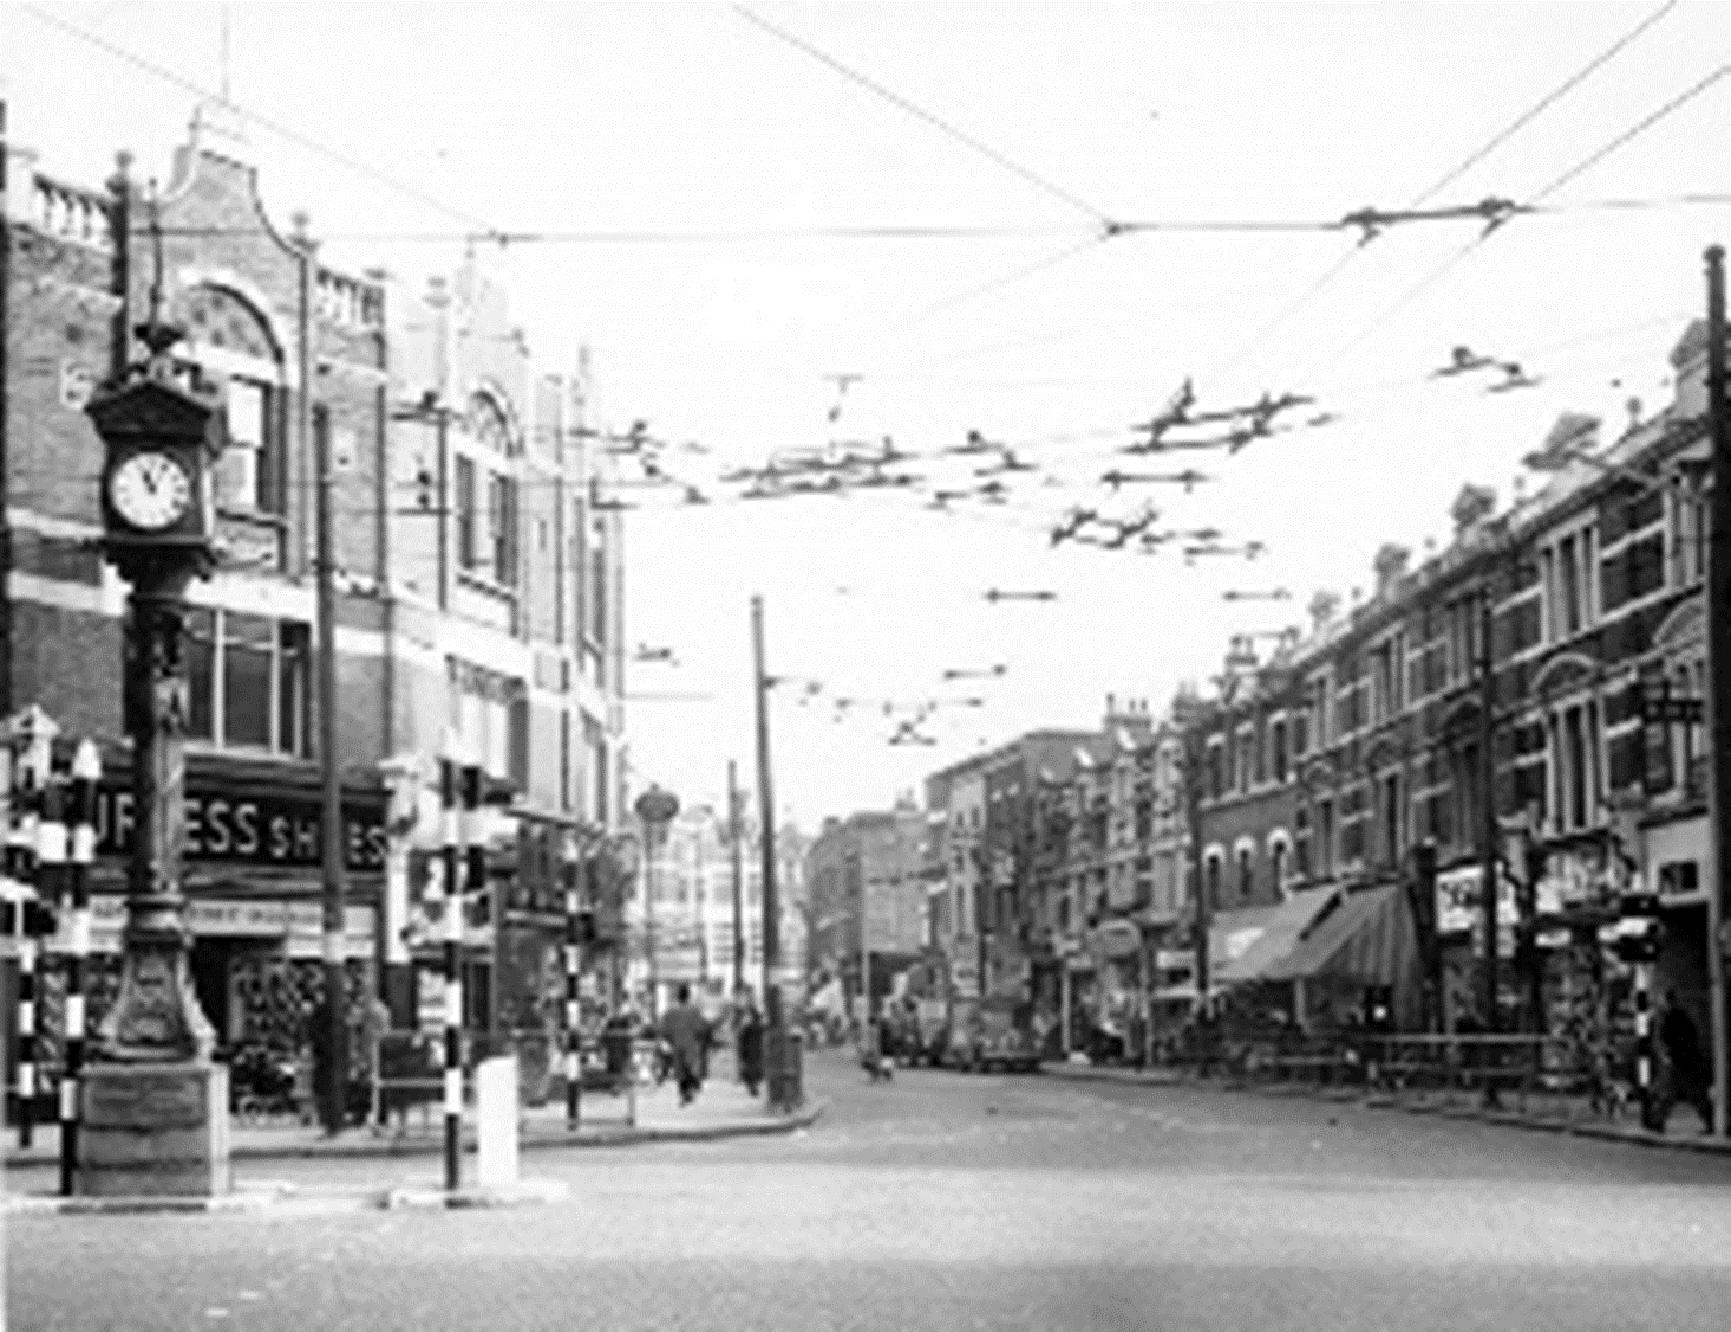 Black and white photograph showing a London street junction with tram wires overhead. An historic clock visible on the left hand side.